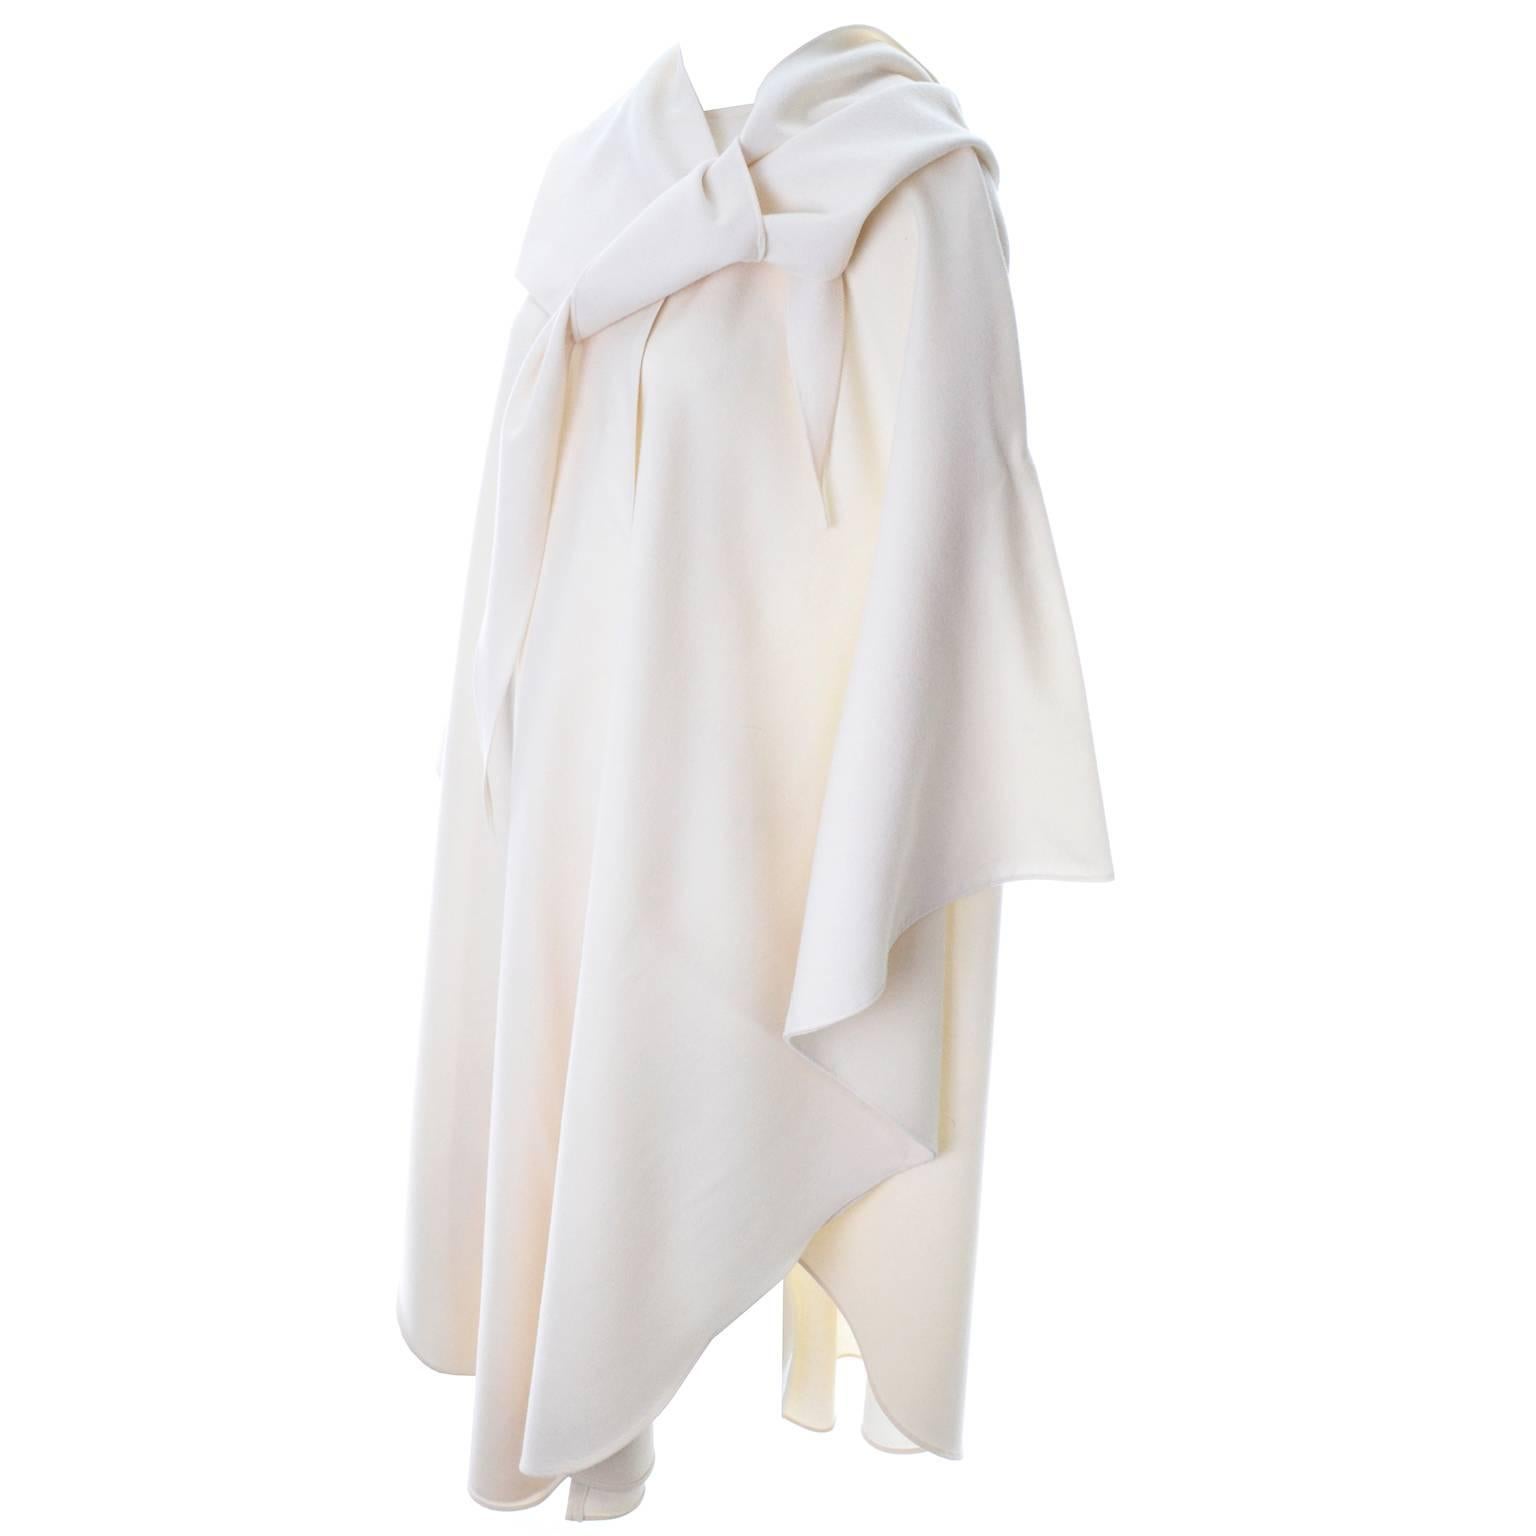 Winter White Wool Designer Yeohlee Hooded Cape Cloak One Size As New